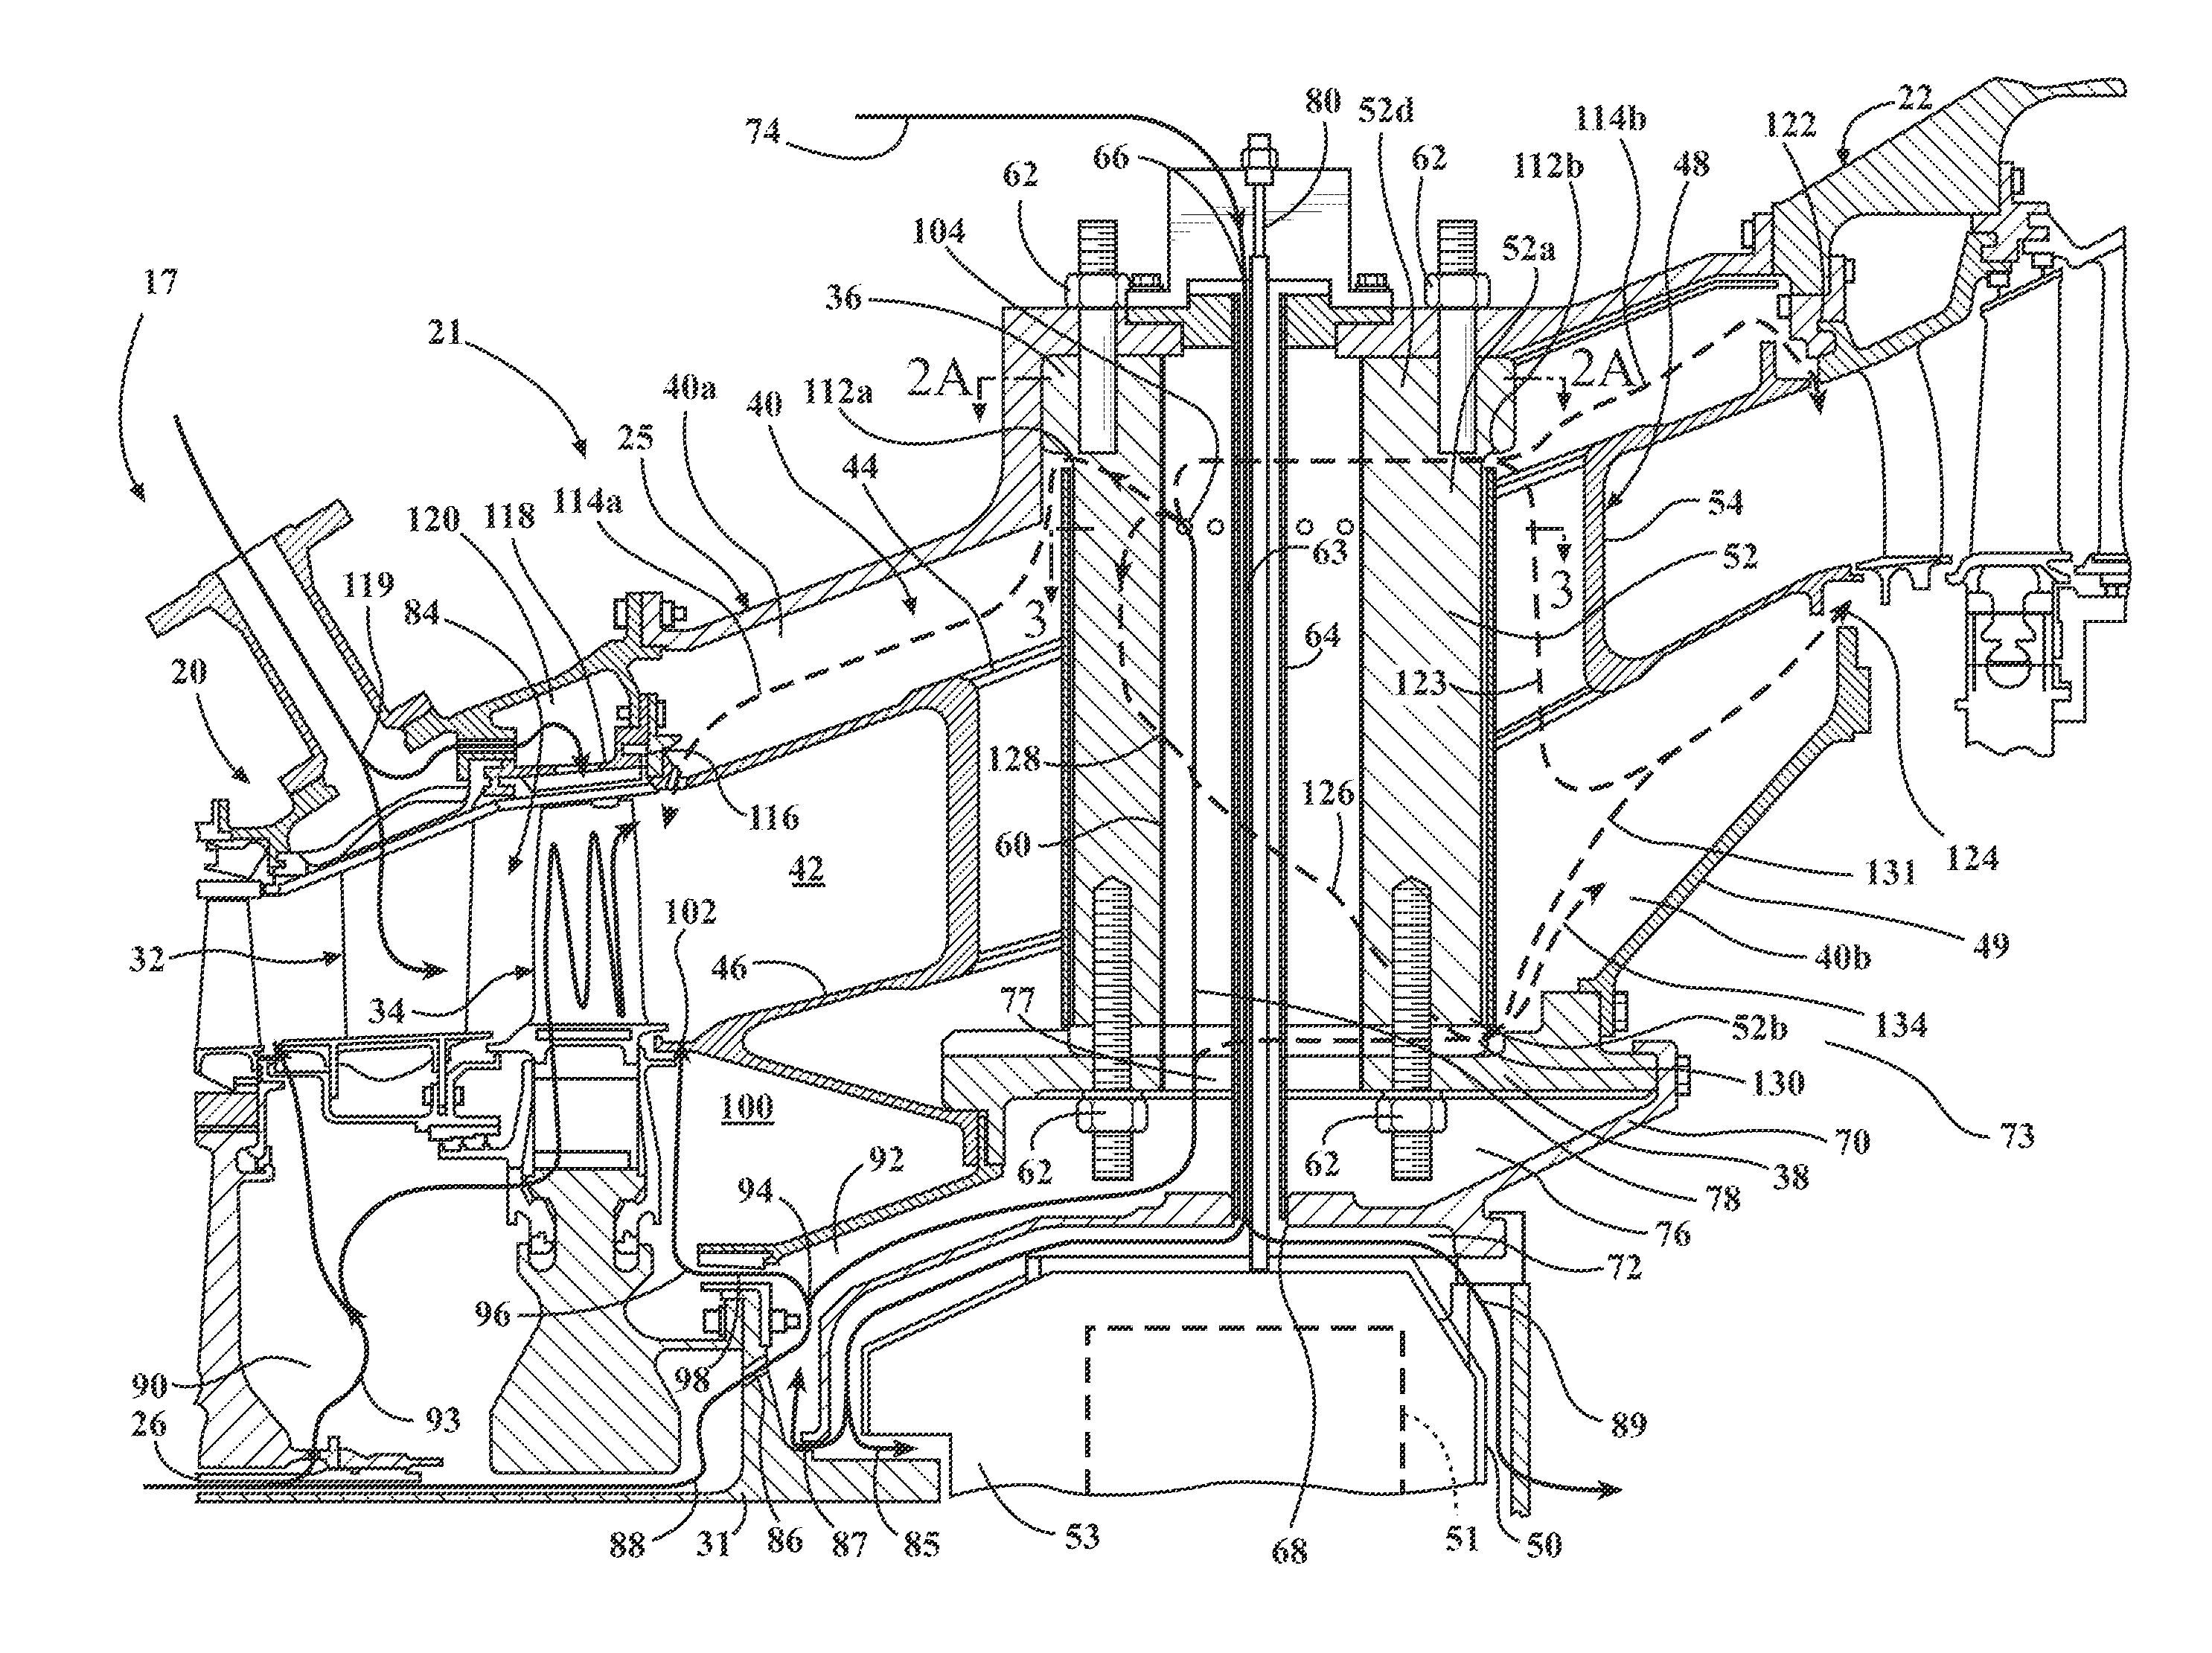 Purge and cooling air for an exhaust section of a gas turbine assembly